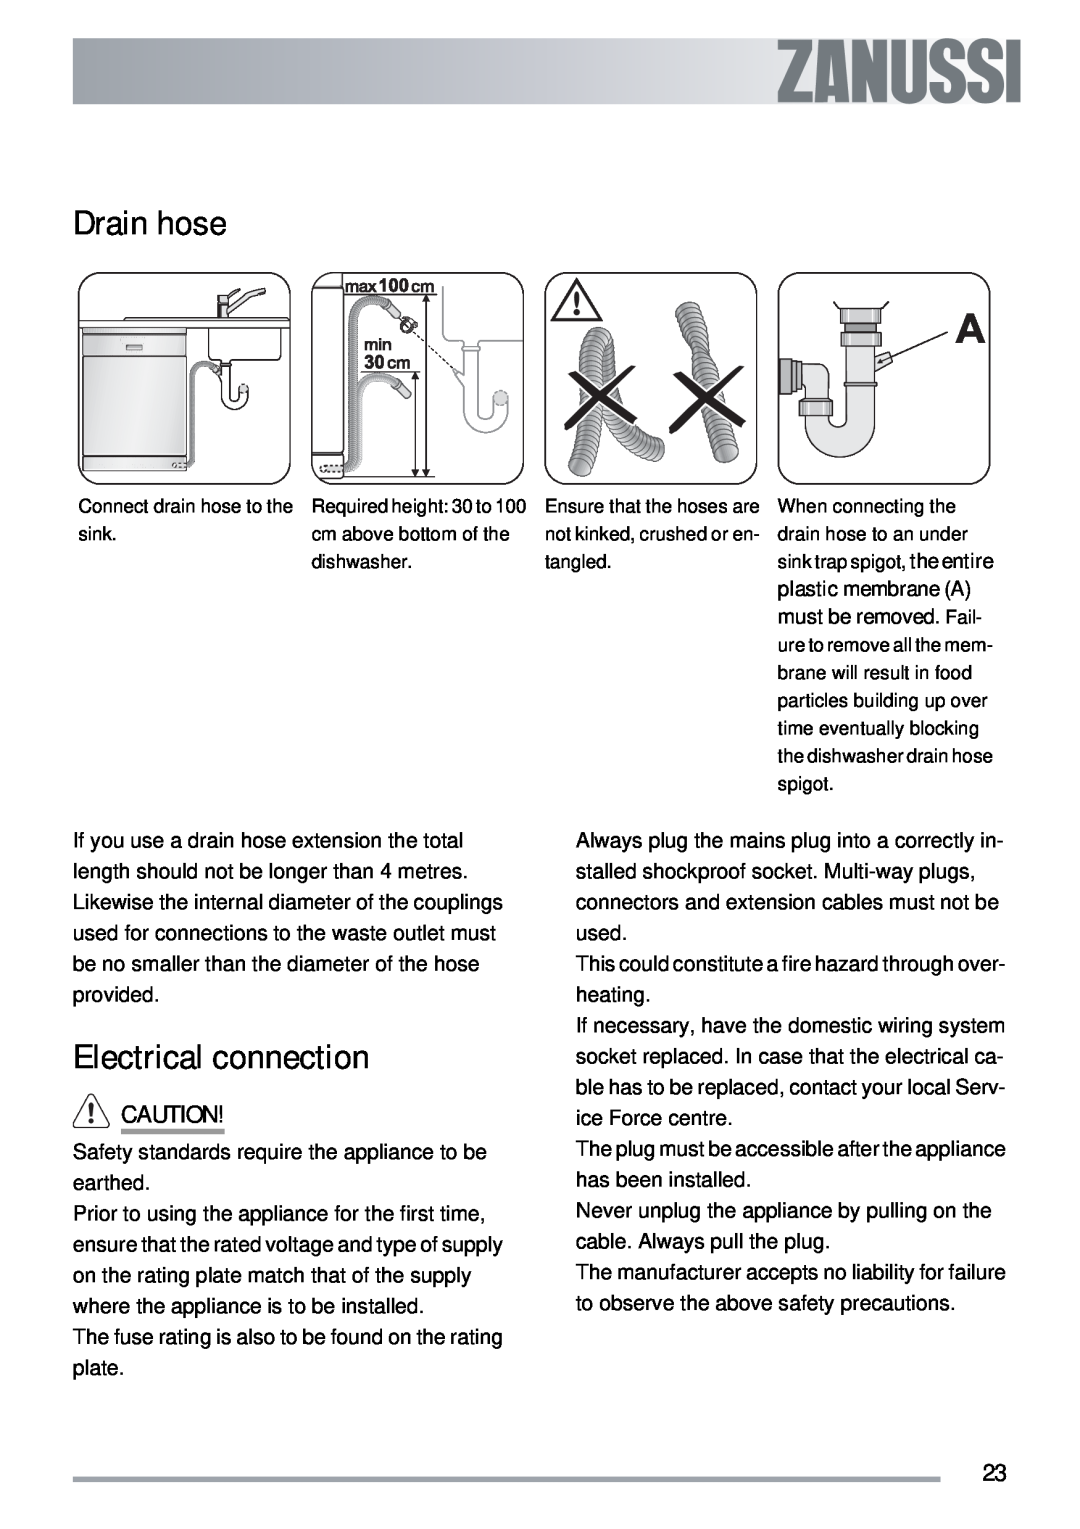 Zanussi ZDT40 user manual Drain hose, Electrical connection, sink, dishwasher, tangled, spigot 